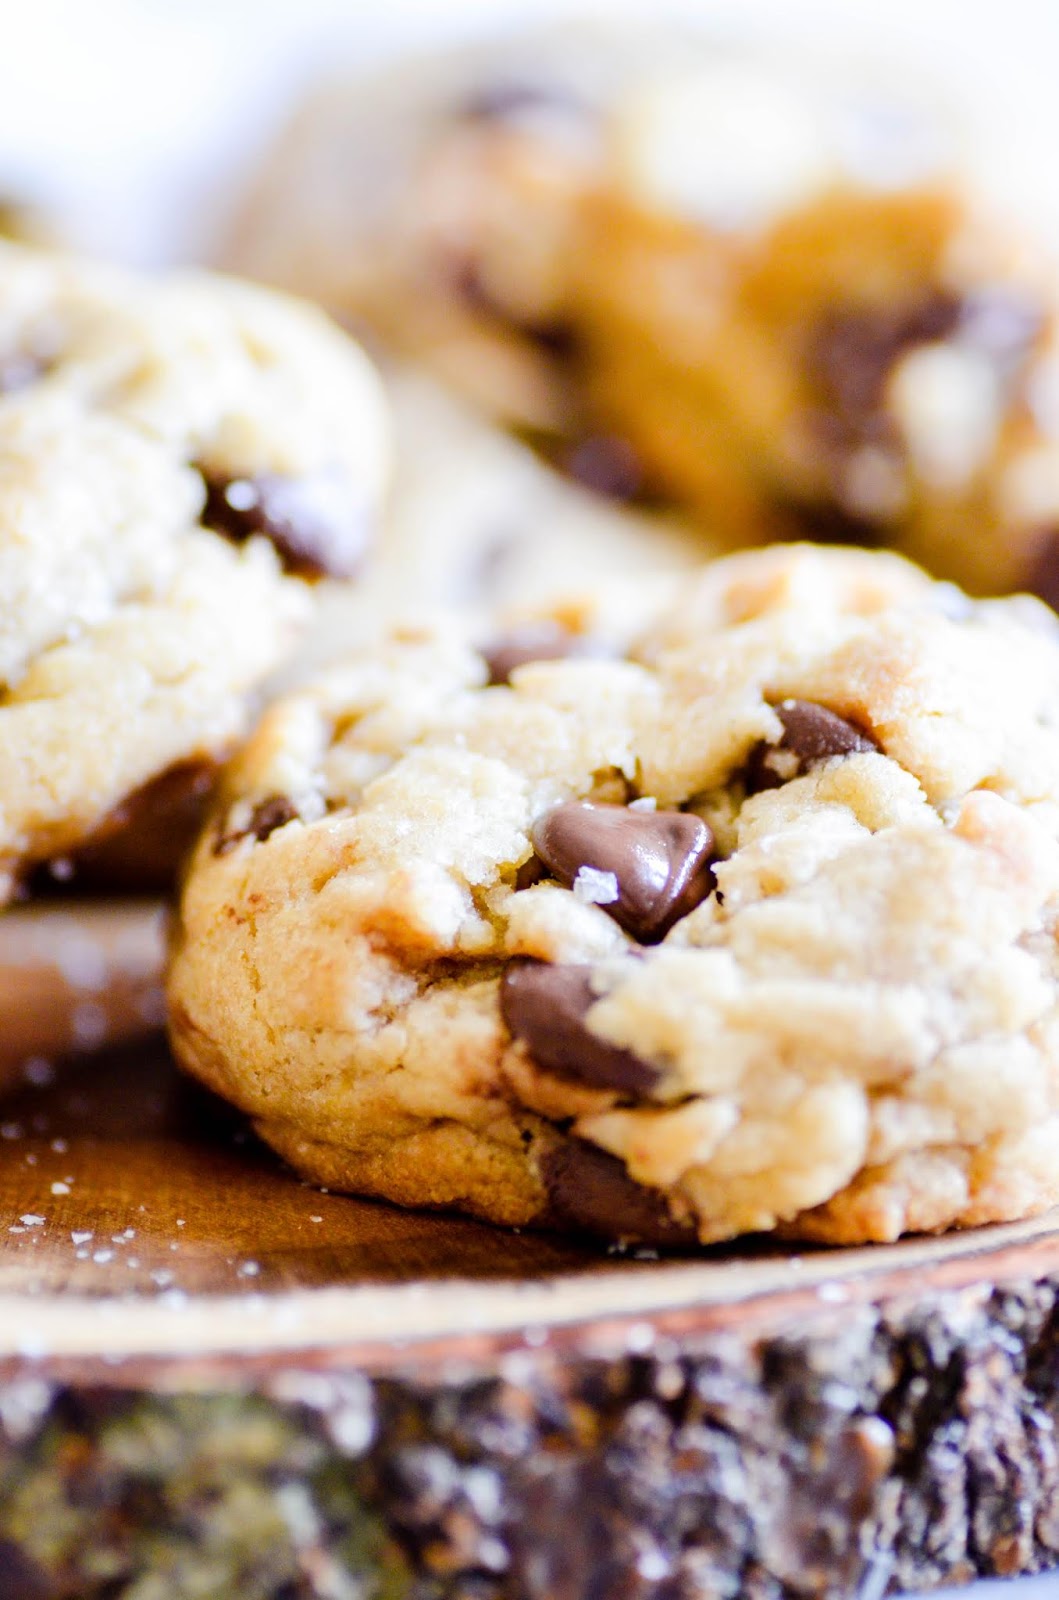 If you're a fan of THICK chocolate chip cookies, this recipe is for you!